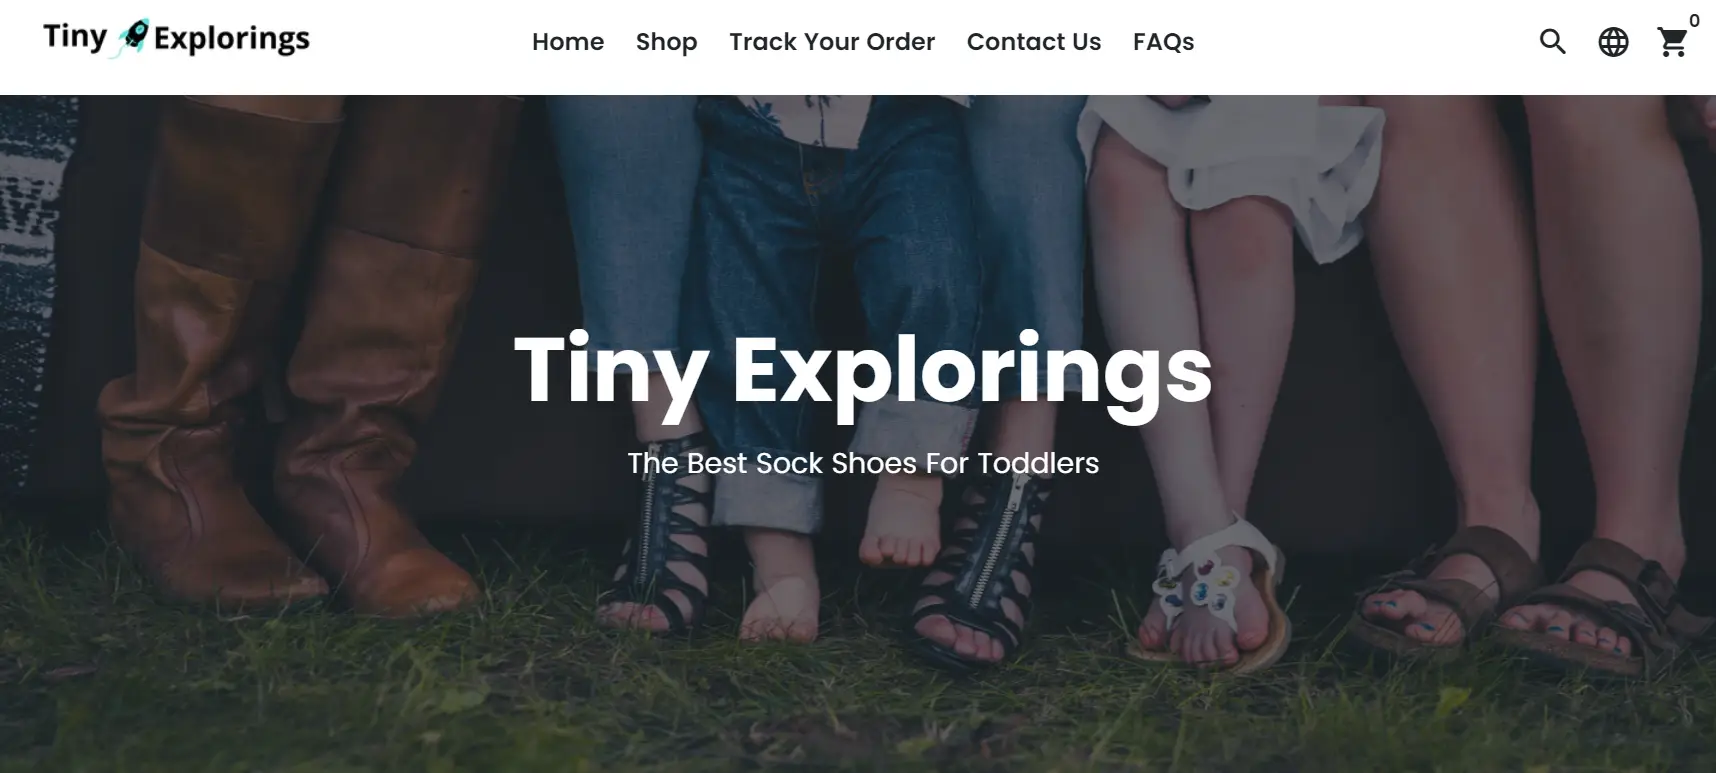 You are currently viewing Is Tiny Explorings Scam Or Legit? Tinyexplorings.com Review